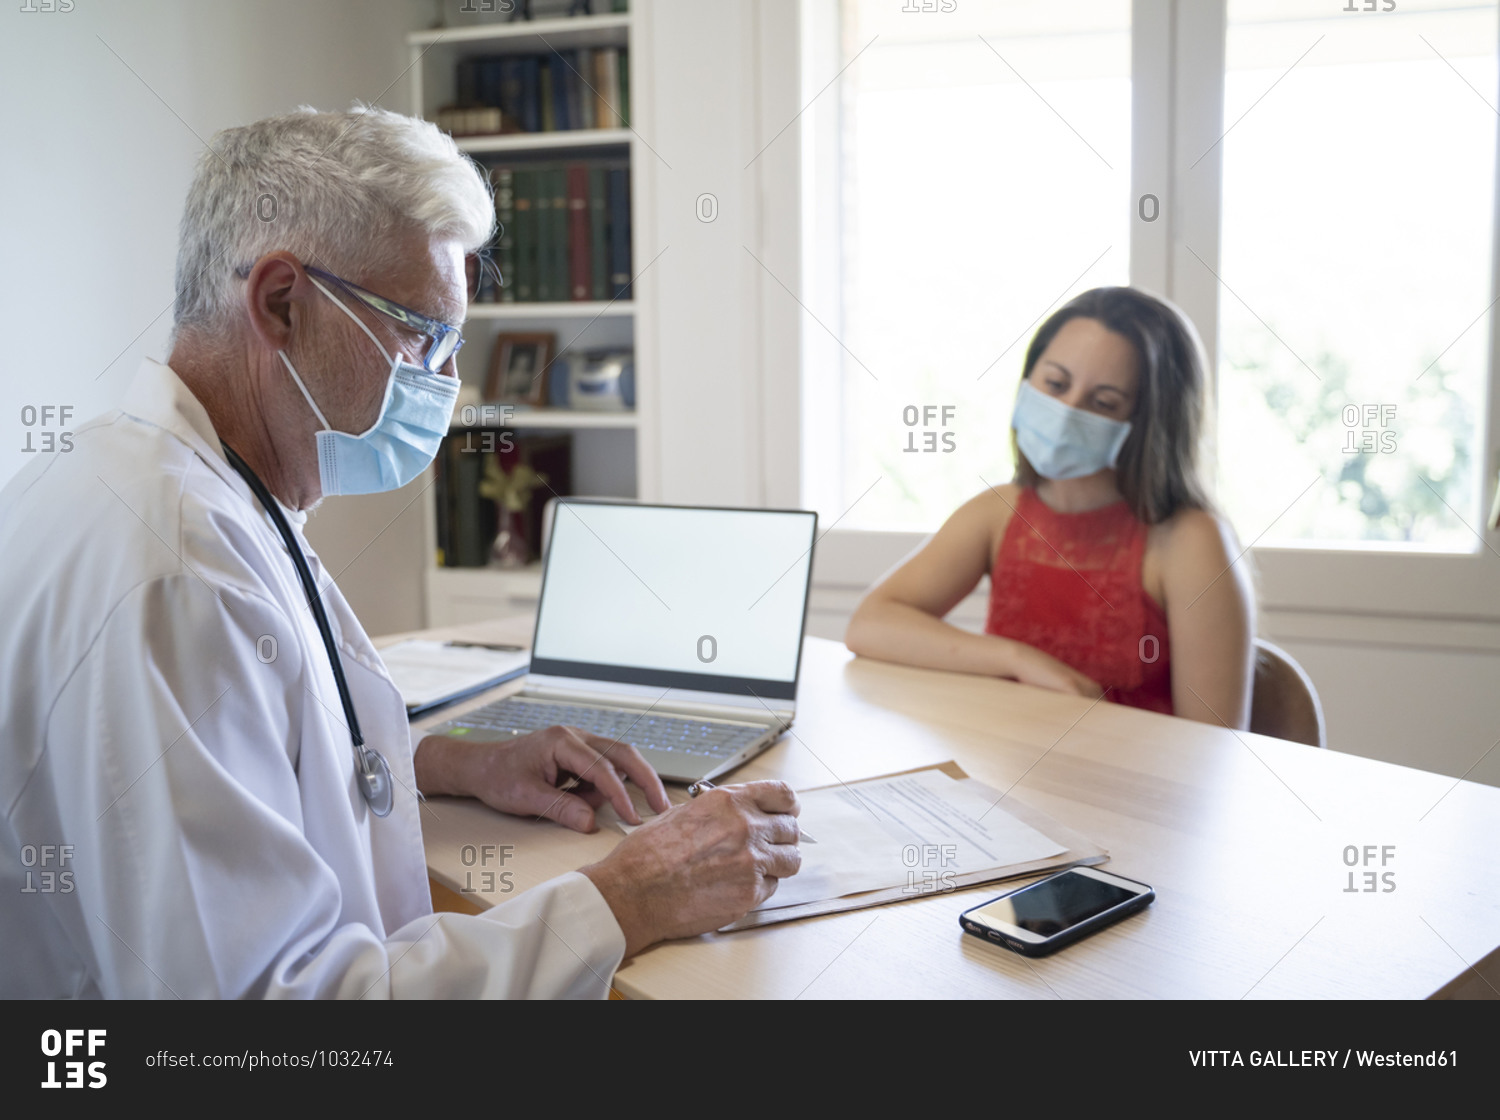 Doctor examining medical record of patient while sitting in clinic